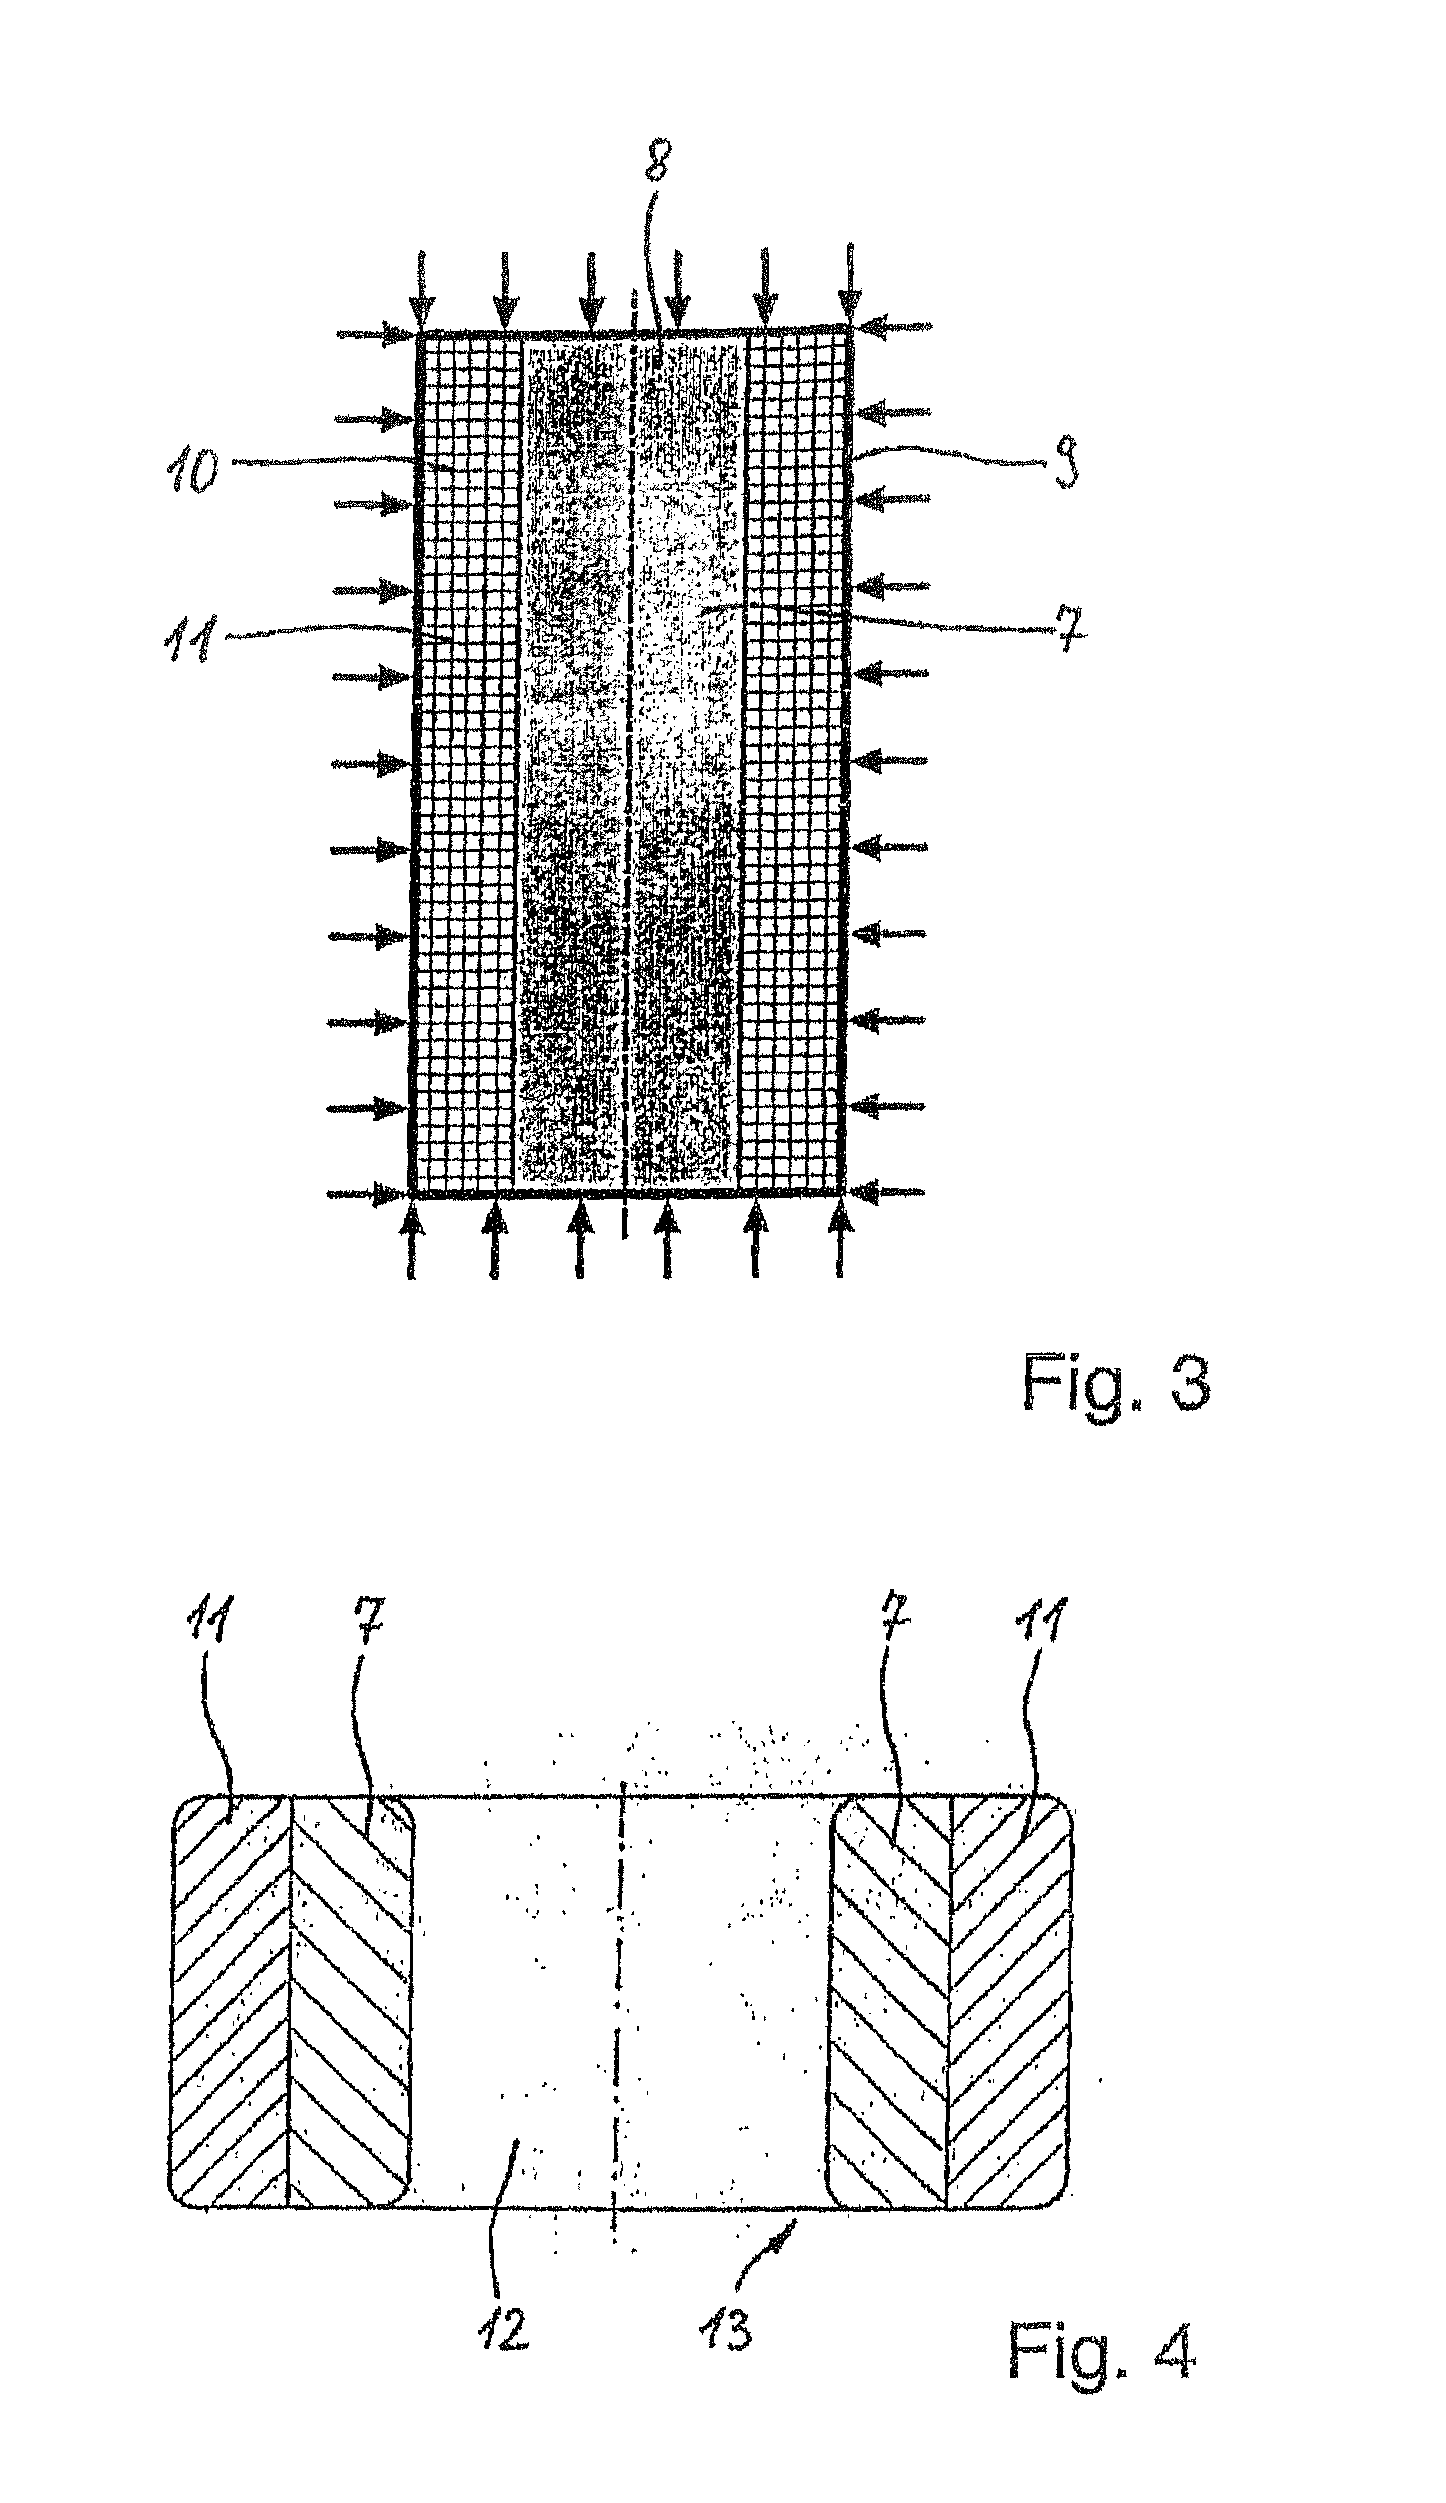 Antifriction Bearing Rage, Particularly For Highly Stressed Antifriction Bearings in Aircraft Power Units and Methods For the Production Thereof